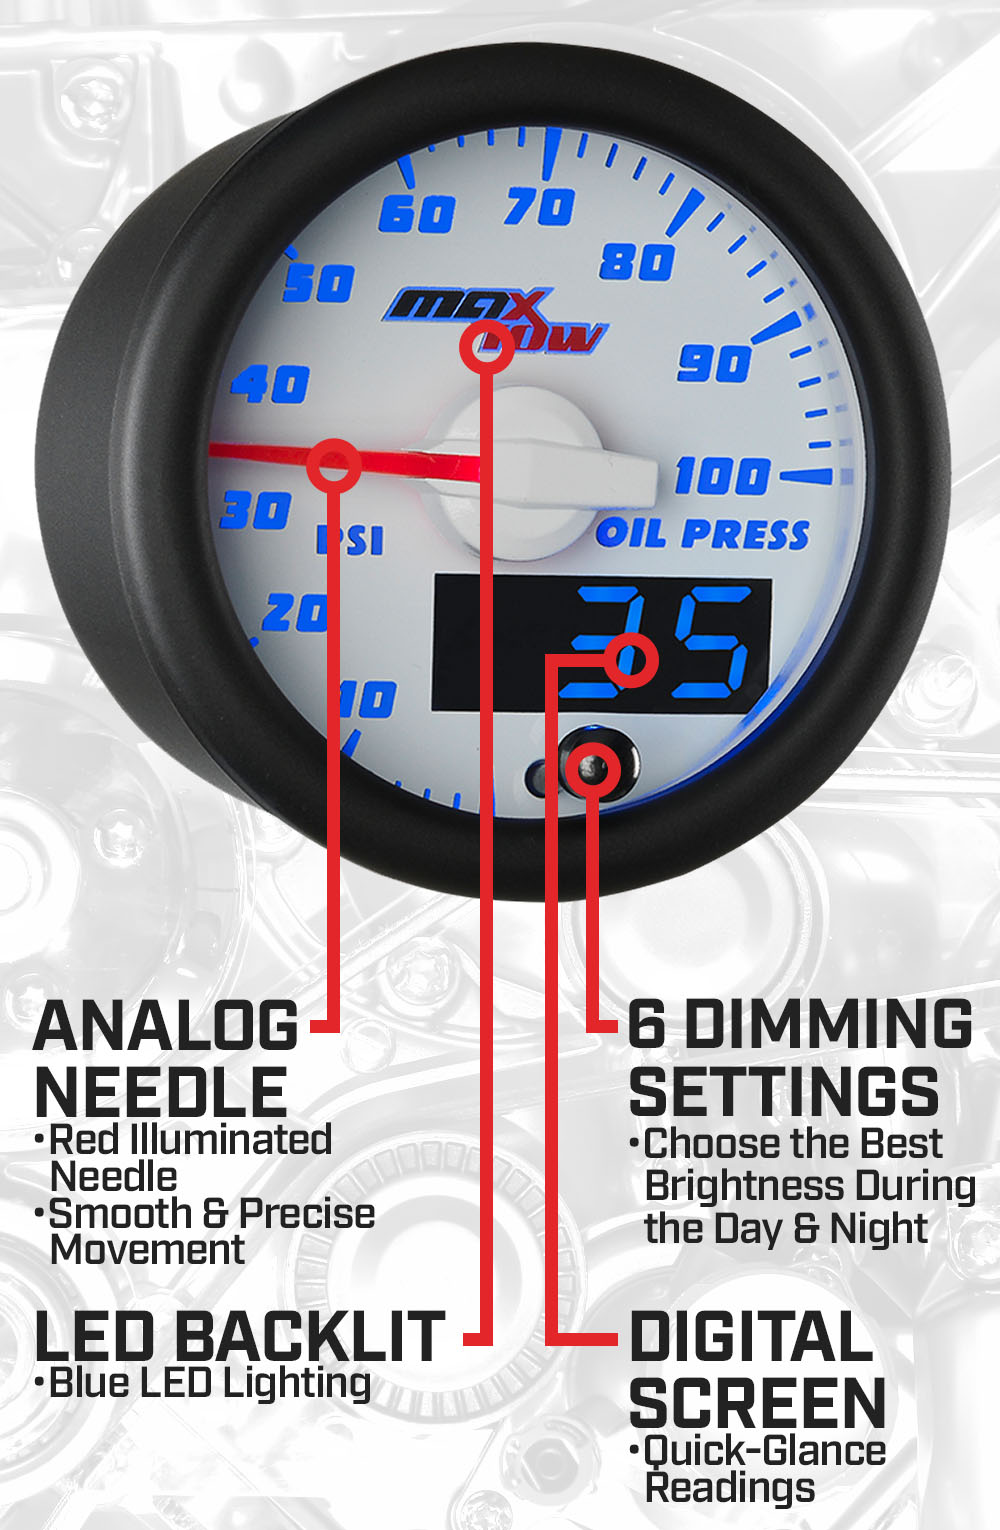 White & Blue Double Vision Oil Pressure Gauge Features